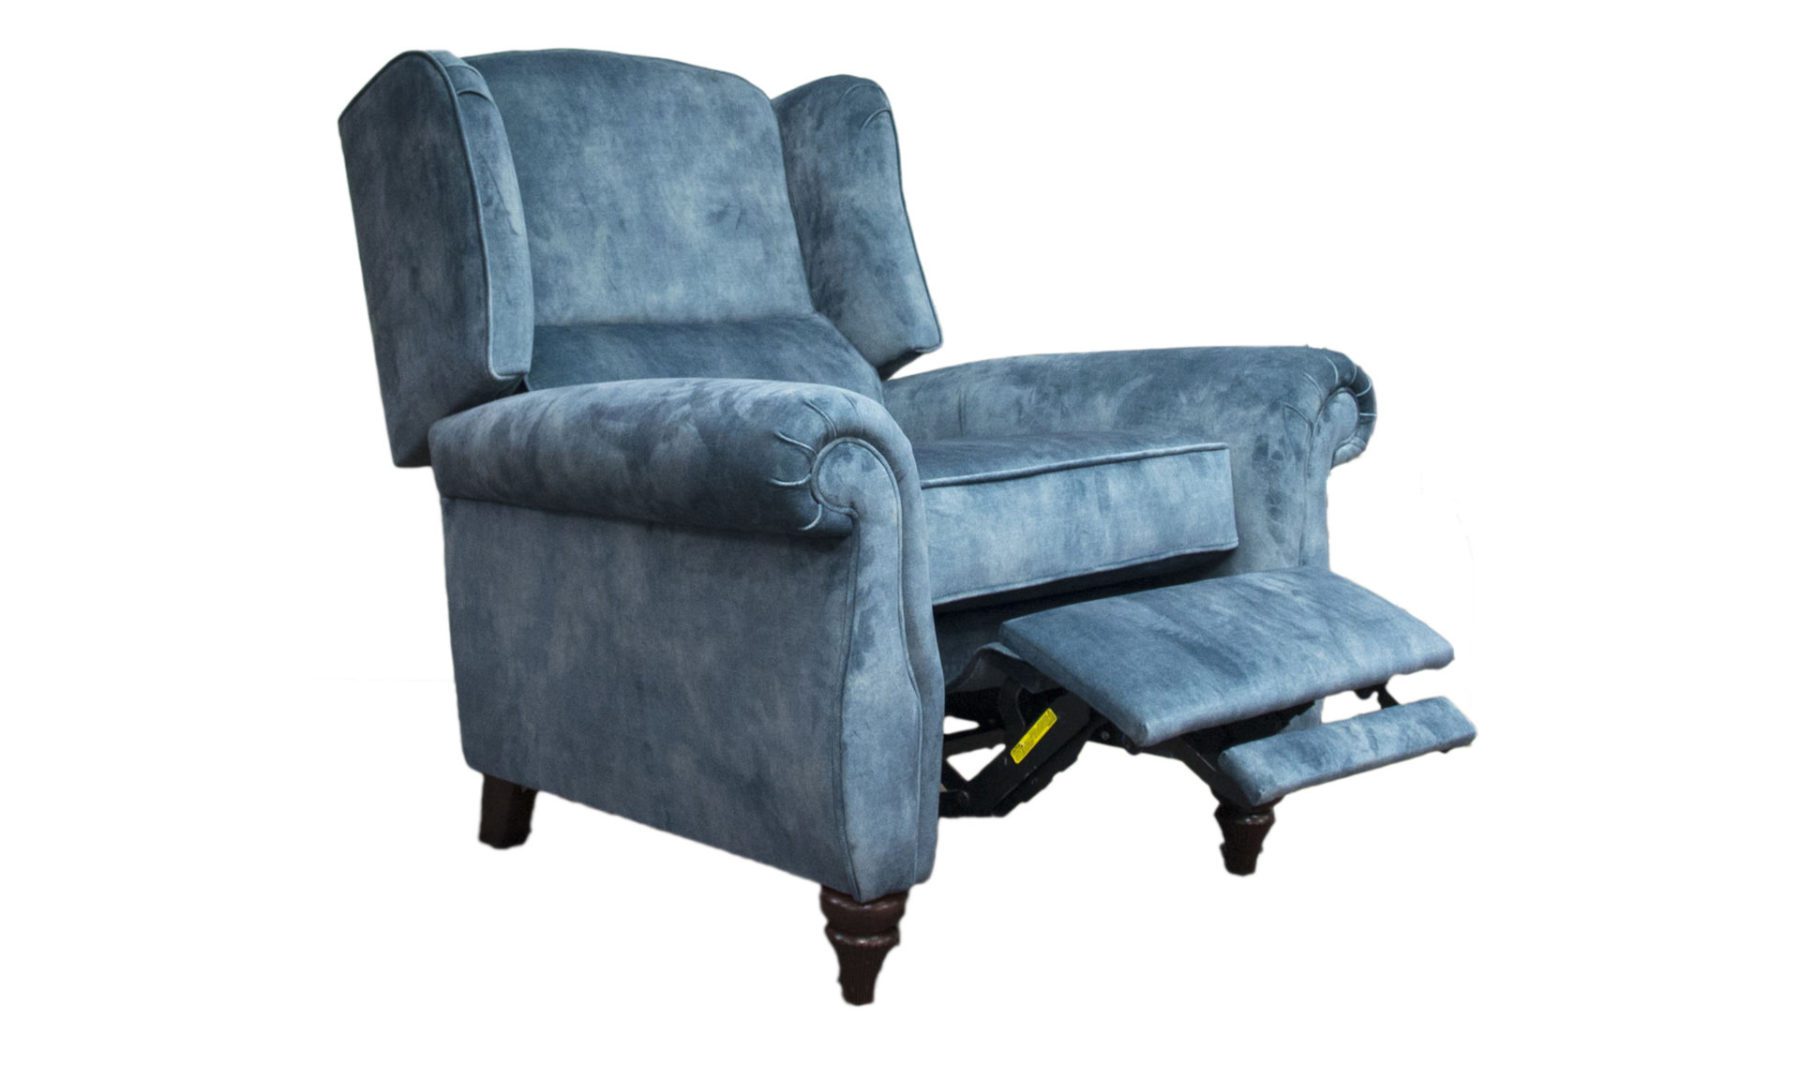 Greville Recliner Chair in Lovely Ocean, Gold Collection Fabric